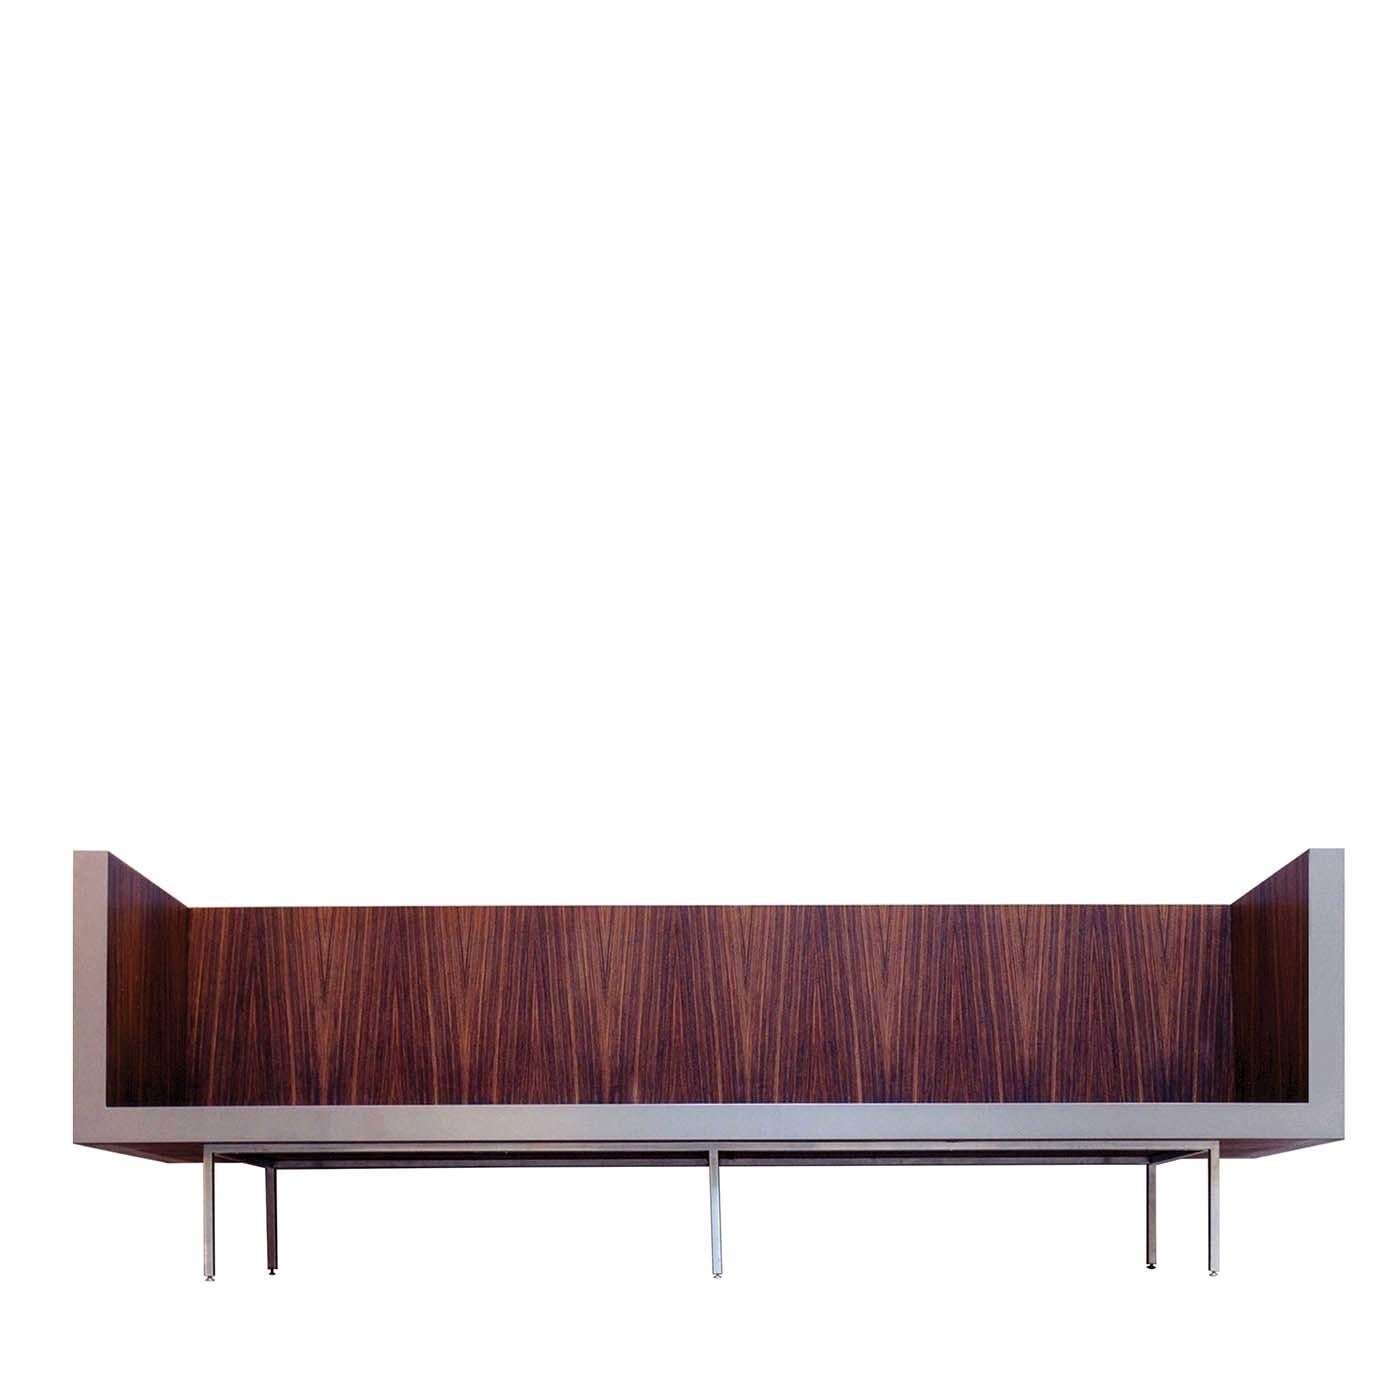 A spectacular design characterizes this remarkable seat, the Milano Bench. Sculpted from a single piece of rosewood and finished in a natural effect matt varnish, it features a supporting structure and front edging in elegant stainless steel. A 2002